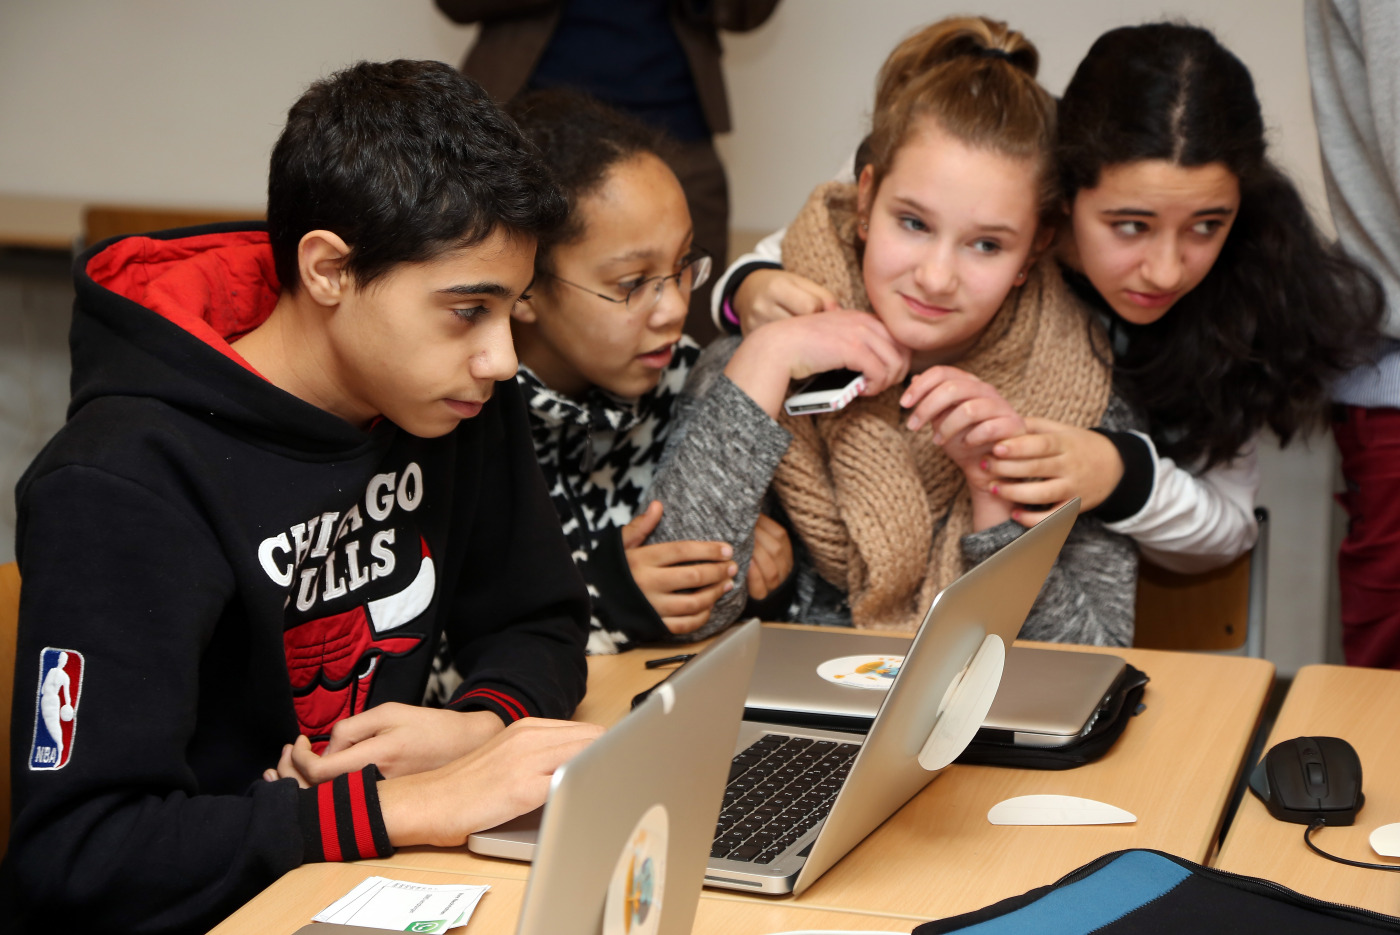 Friedensburg High School on the 10th annual Safer Internet Day in Berlin, Germany. (Adam Berry&mdash;Getty Images)